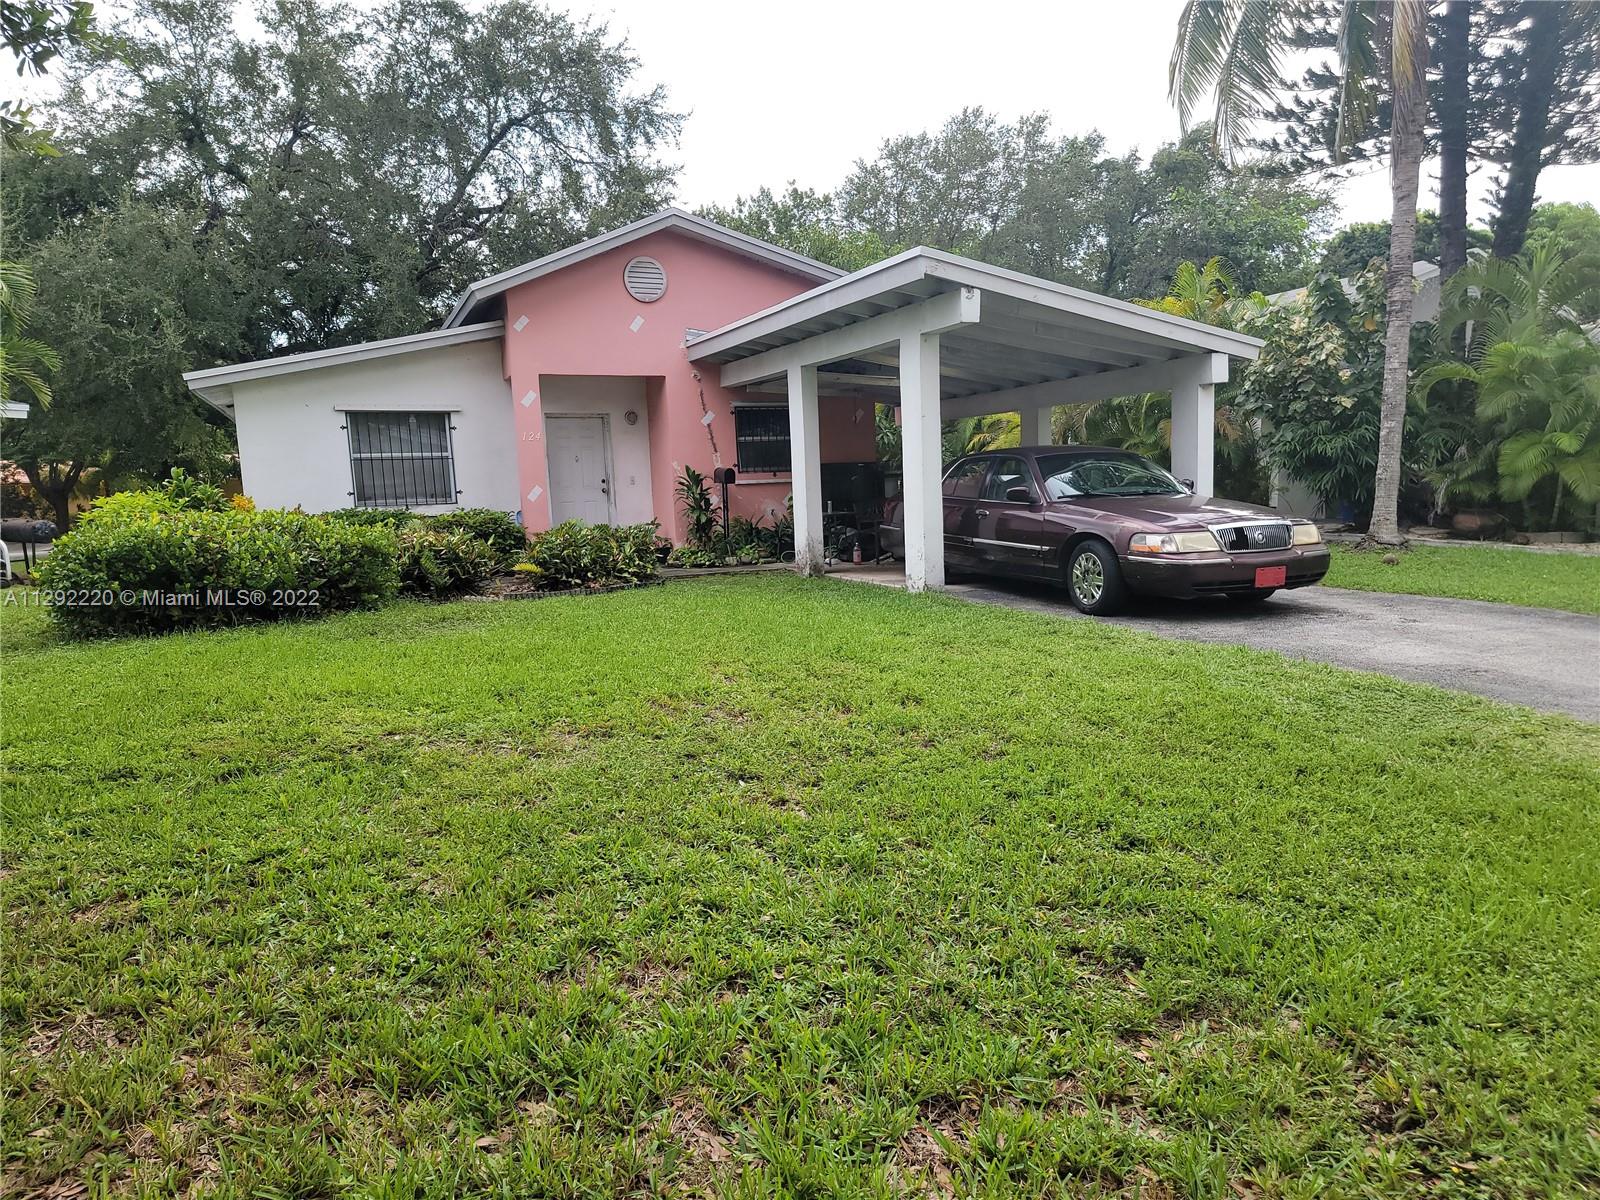 Just Reduced! Spacious 4 Bed/ 2 Bed with Carport - Excellent Location - Nestled in between Coconut Grove & Coral Gables - 1 block off US1 near the new Trader Joes - Living/Dining Room has Vaulted Ceilings - Separate spacious Laundry Room - Lots of storage - Needs some TLC - Built-in 1996 - Lush Landscaping with beautiful Oak Tree shading the backyard. 24 hour notice for showings